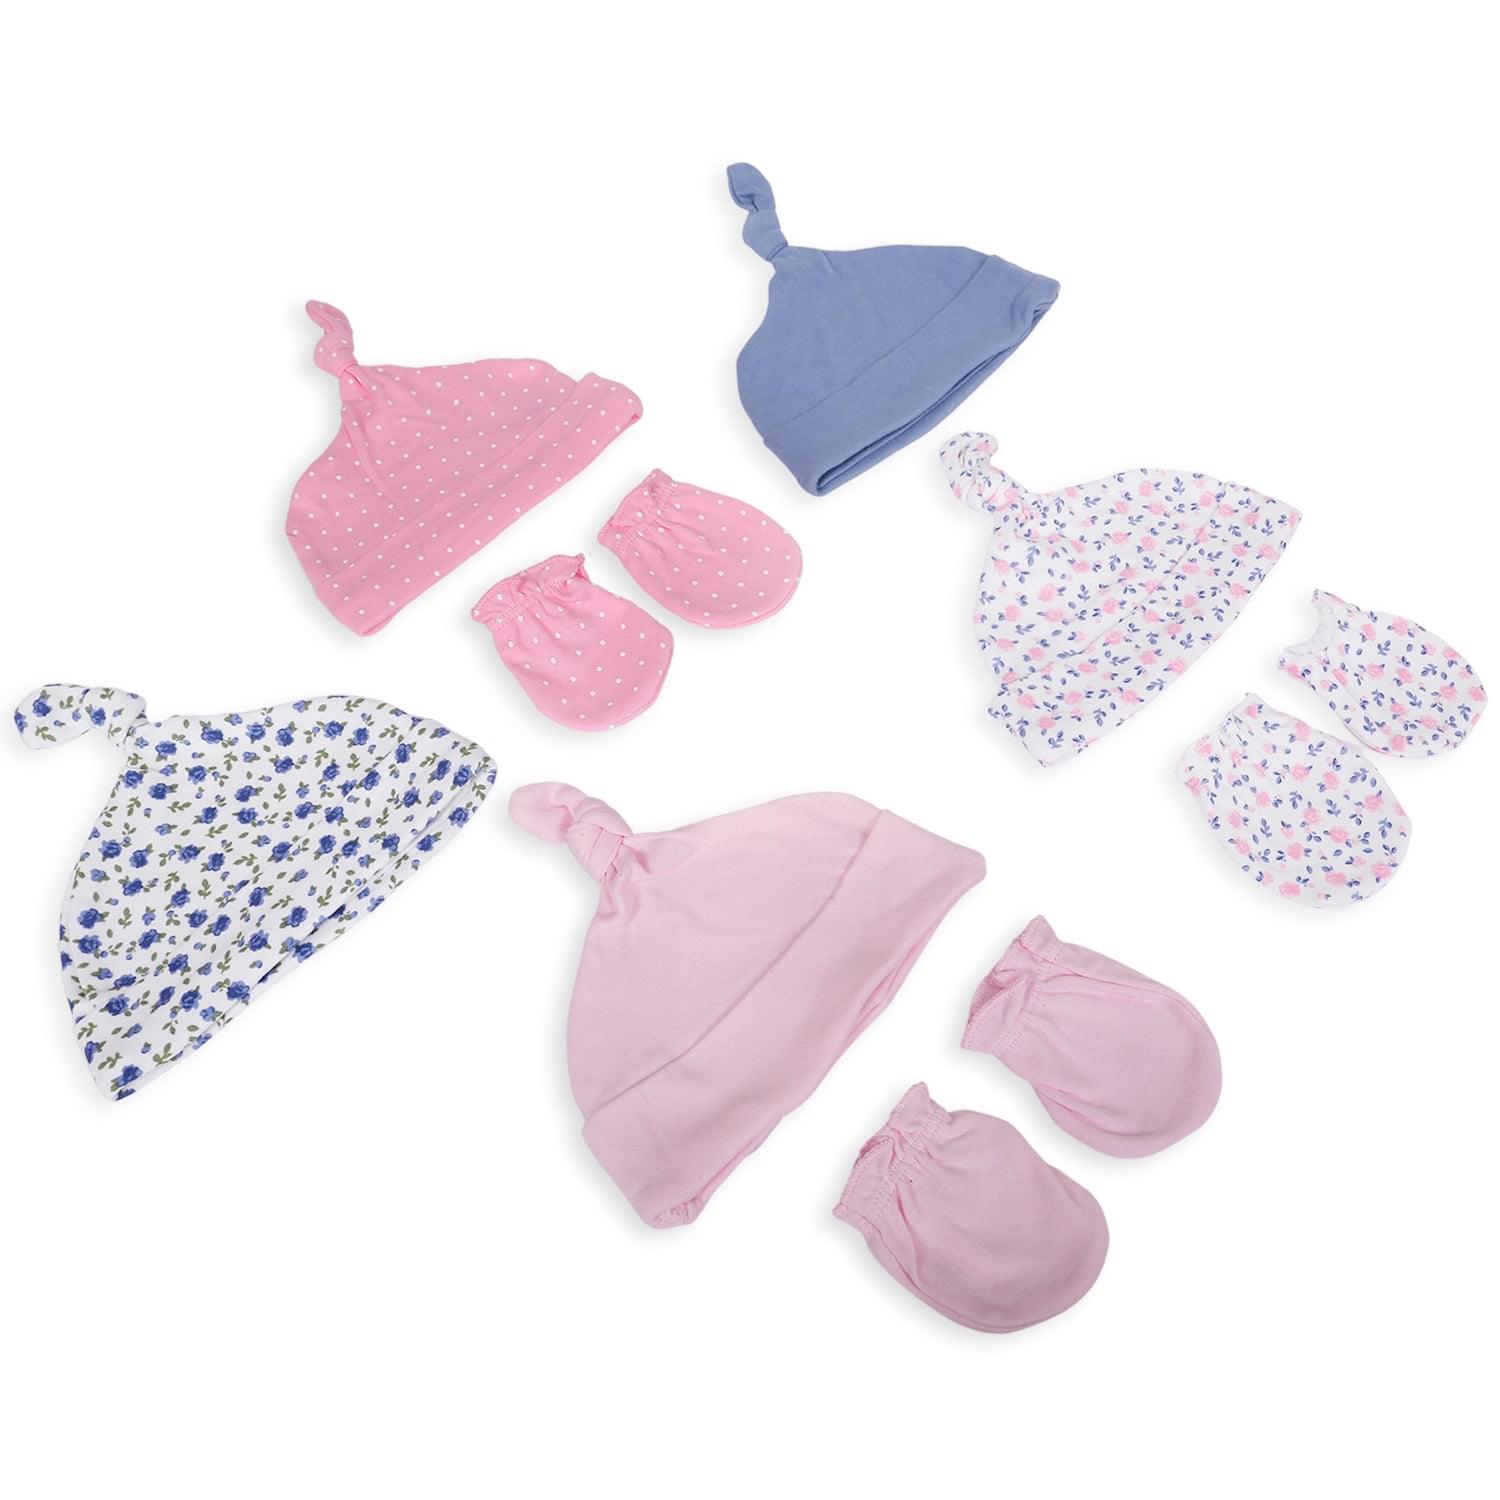 5 Caps And 3 Pair Mittens Floral And Polka Dots Pink Blue - Baby Moo